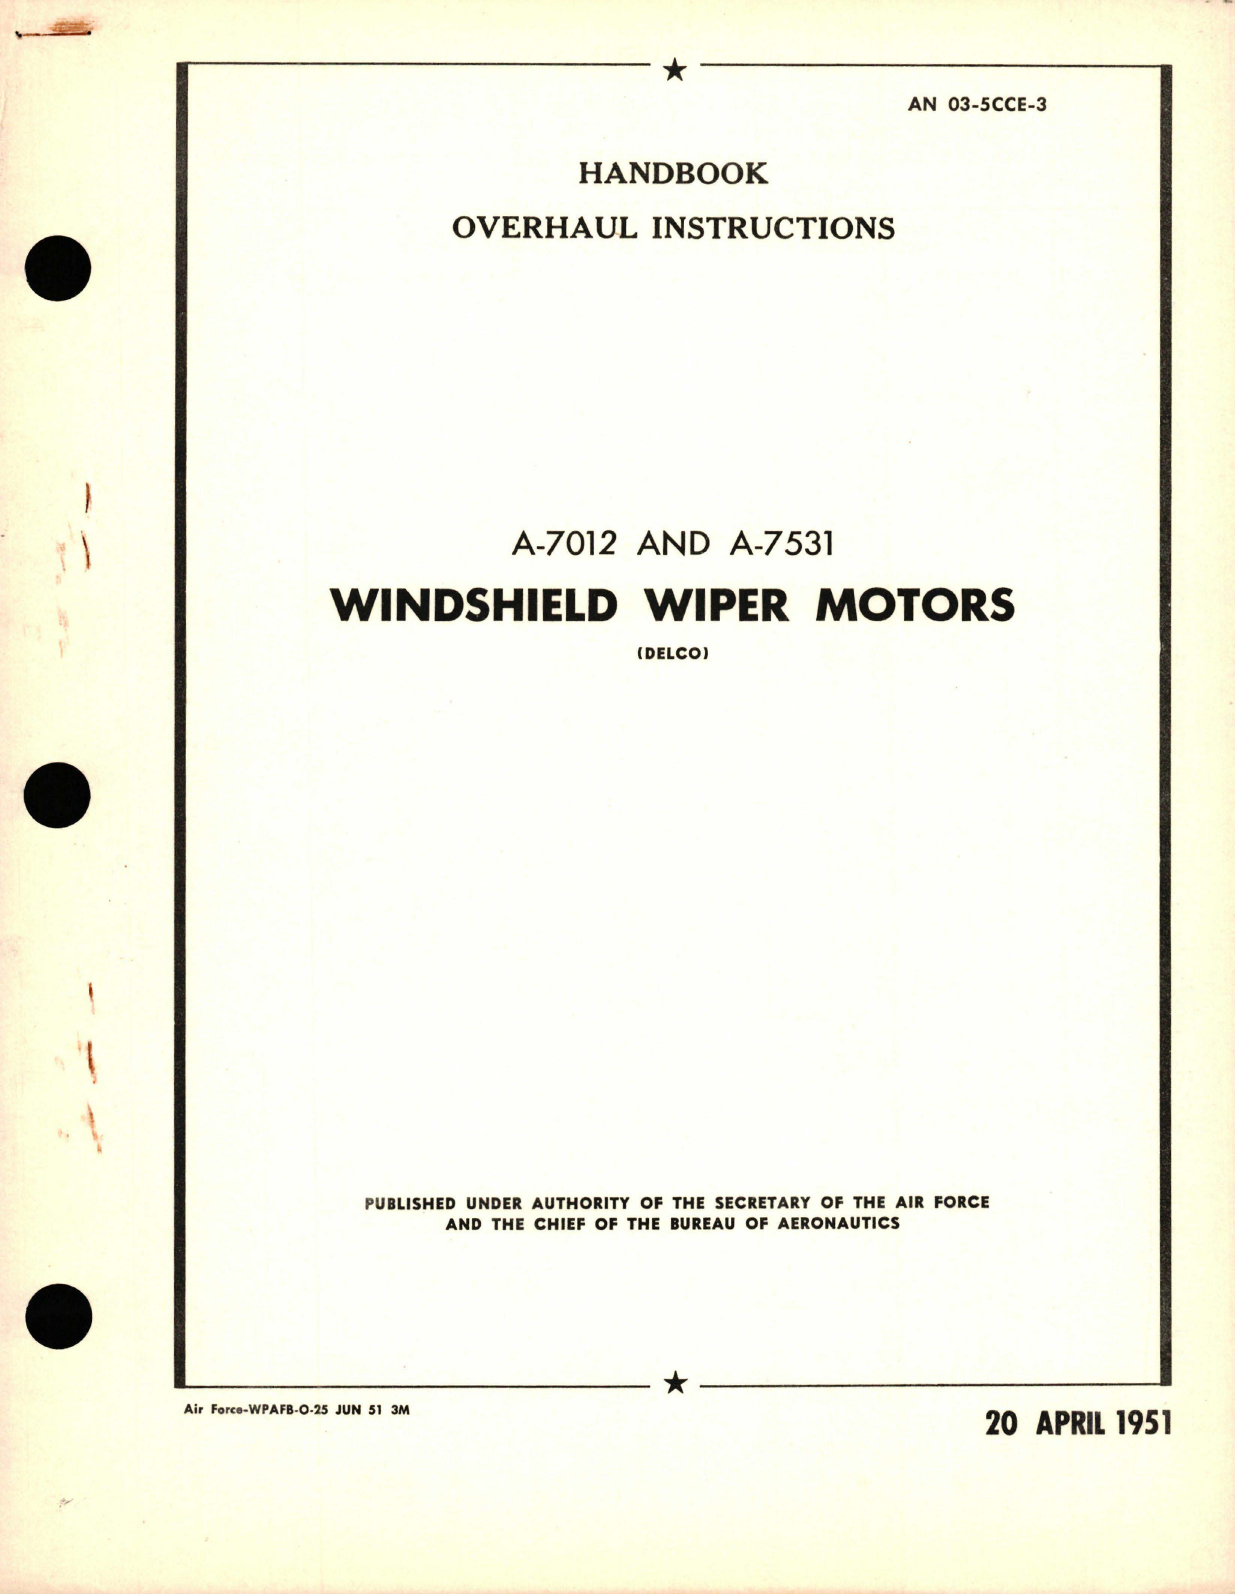 Sample page 1 from AirCorps Library document: Overhaul Instructions for Windshield Wiper Motors - A-7012 and A-7531